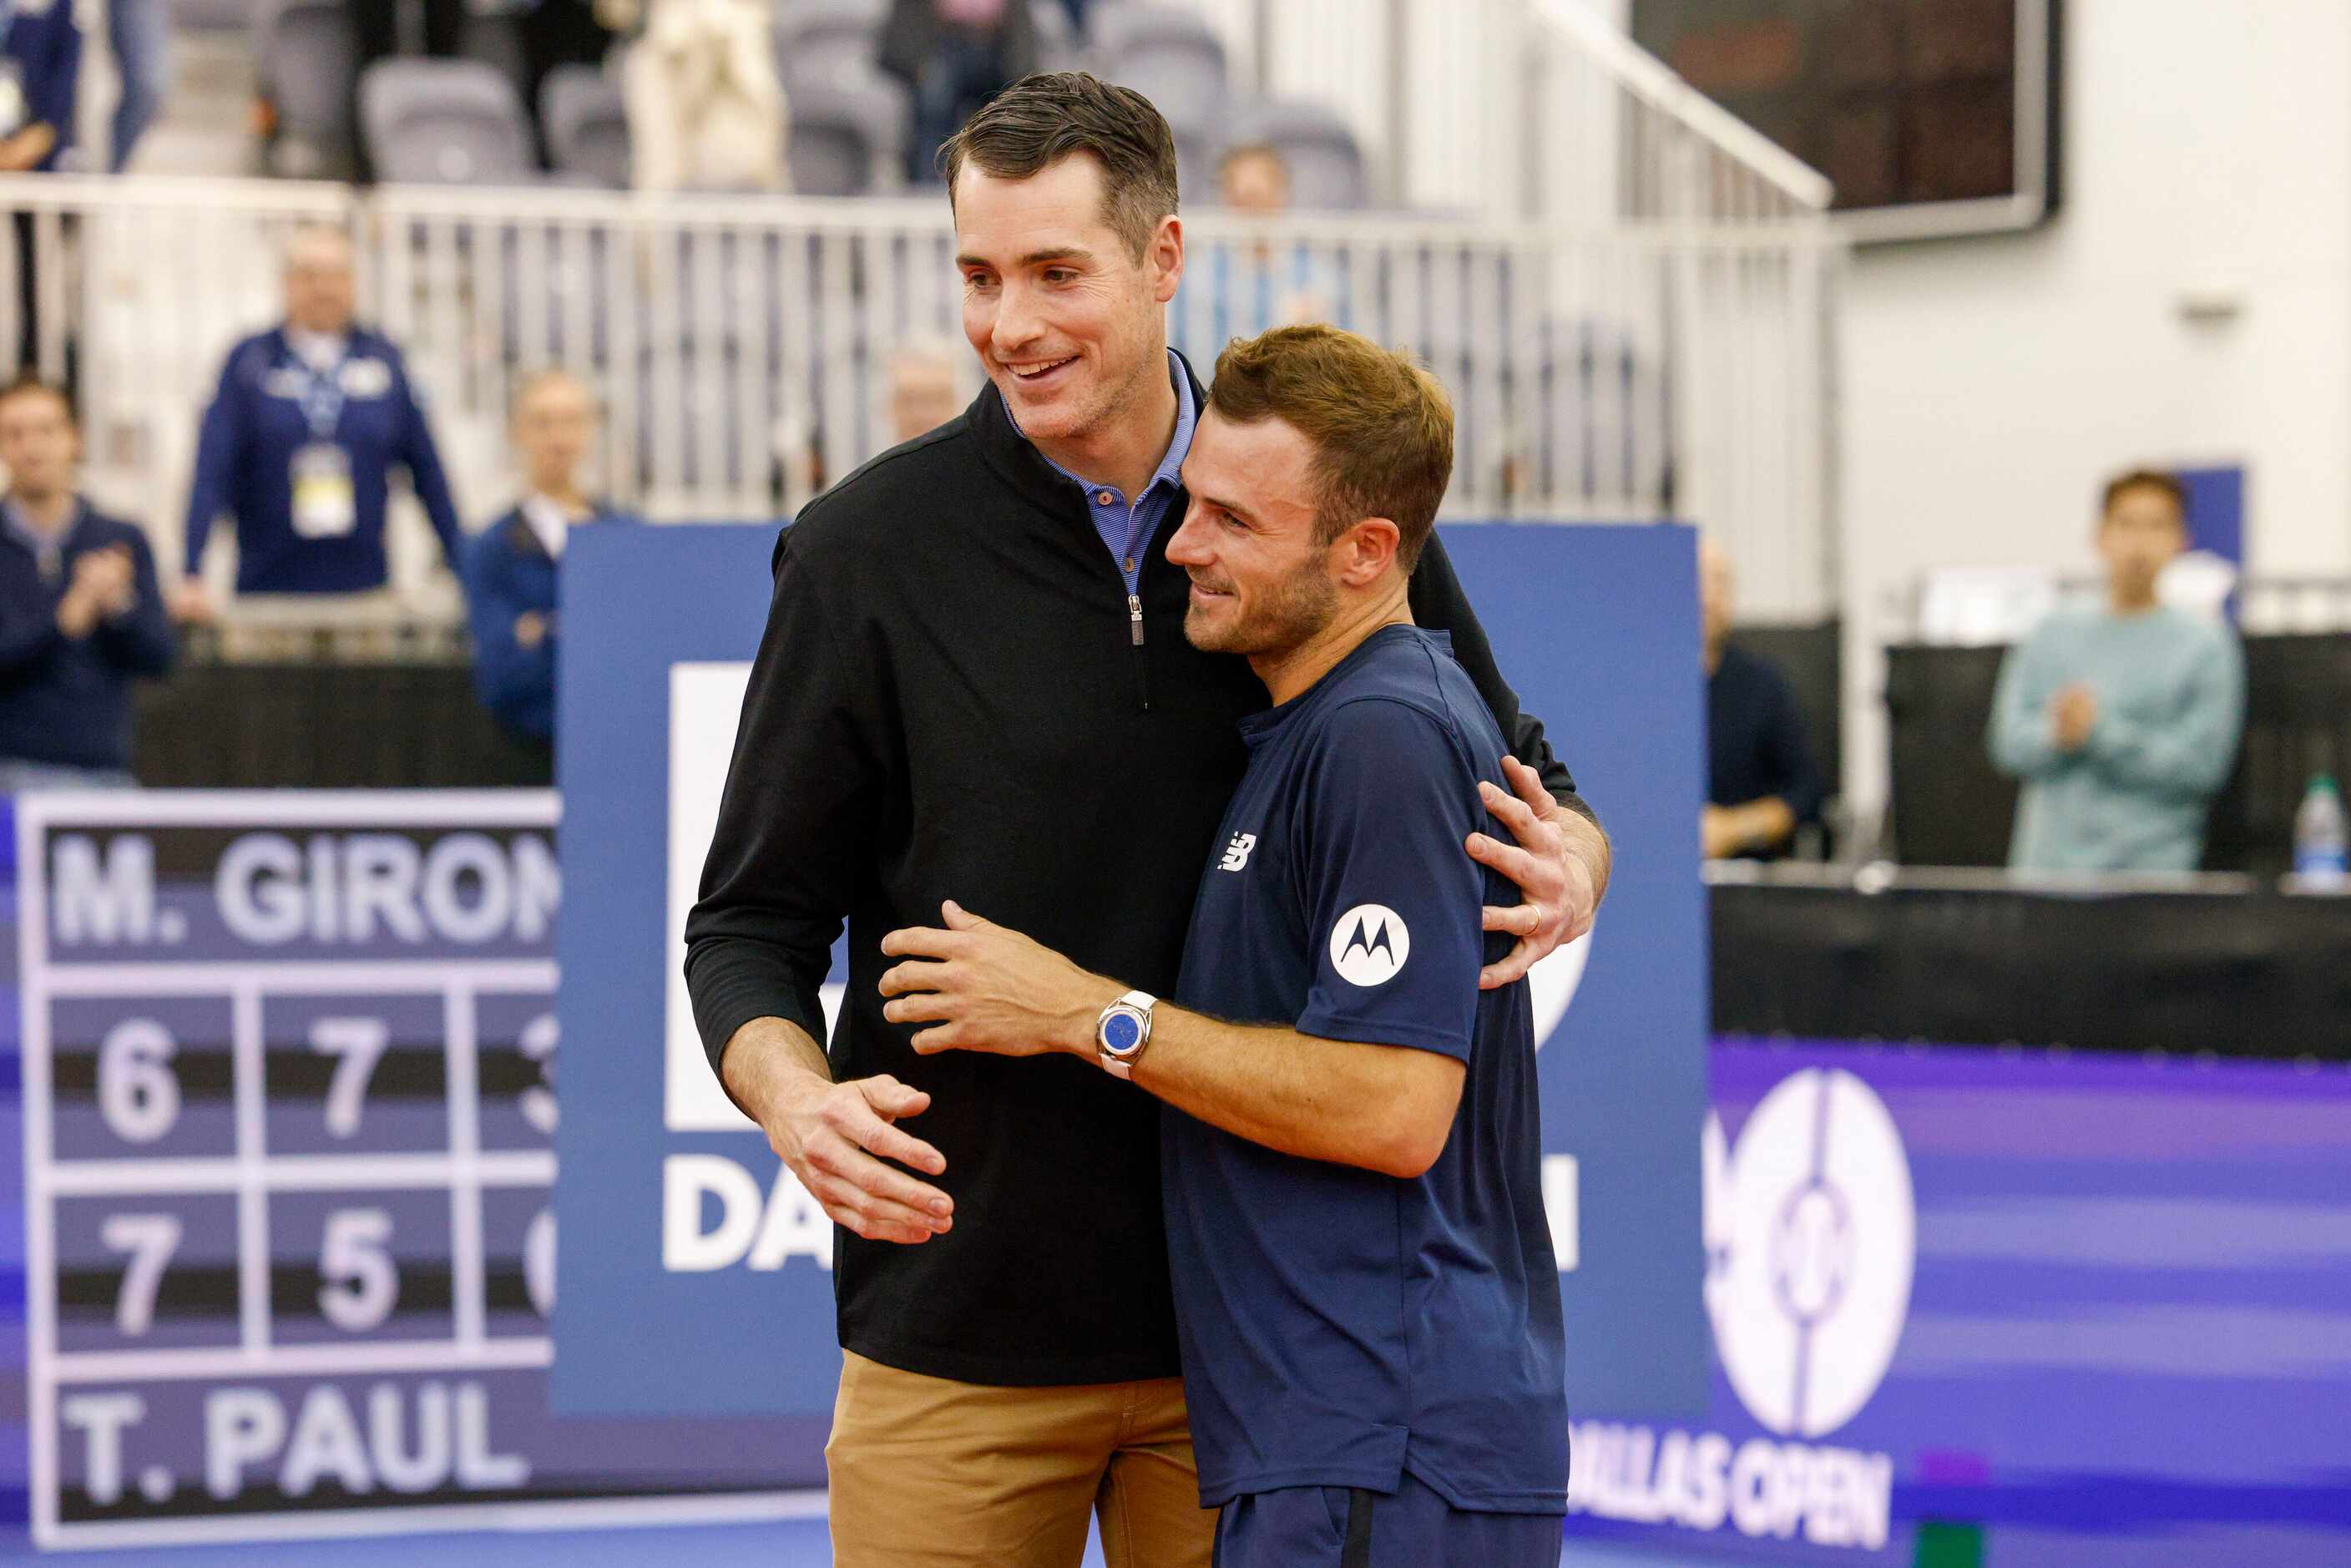 Former professional tennis player Jon Isner (left) embraces Tommy Paul of the U.S. as he...